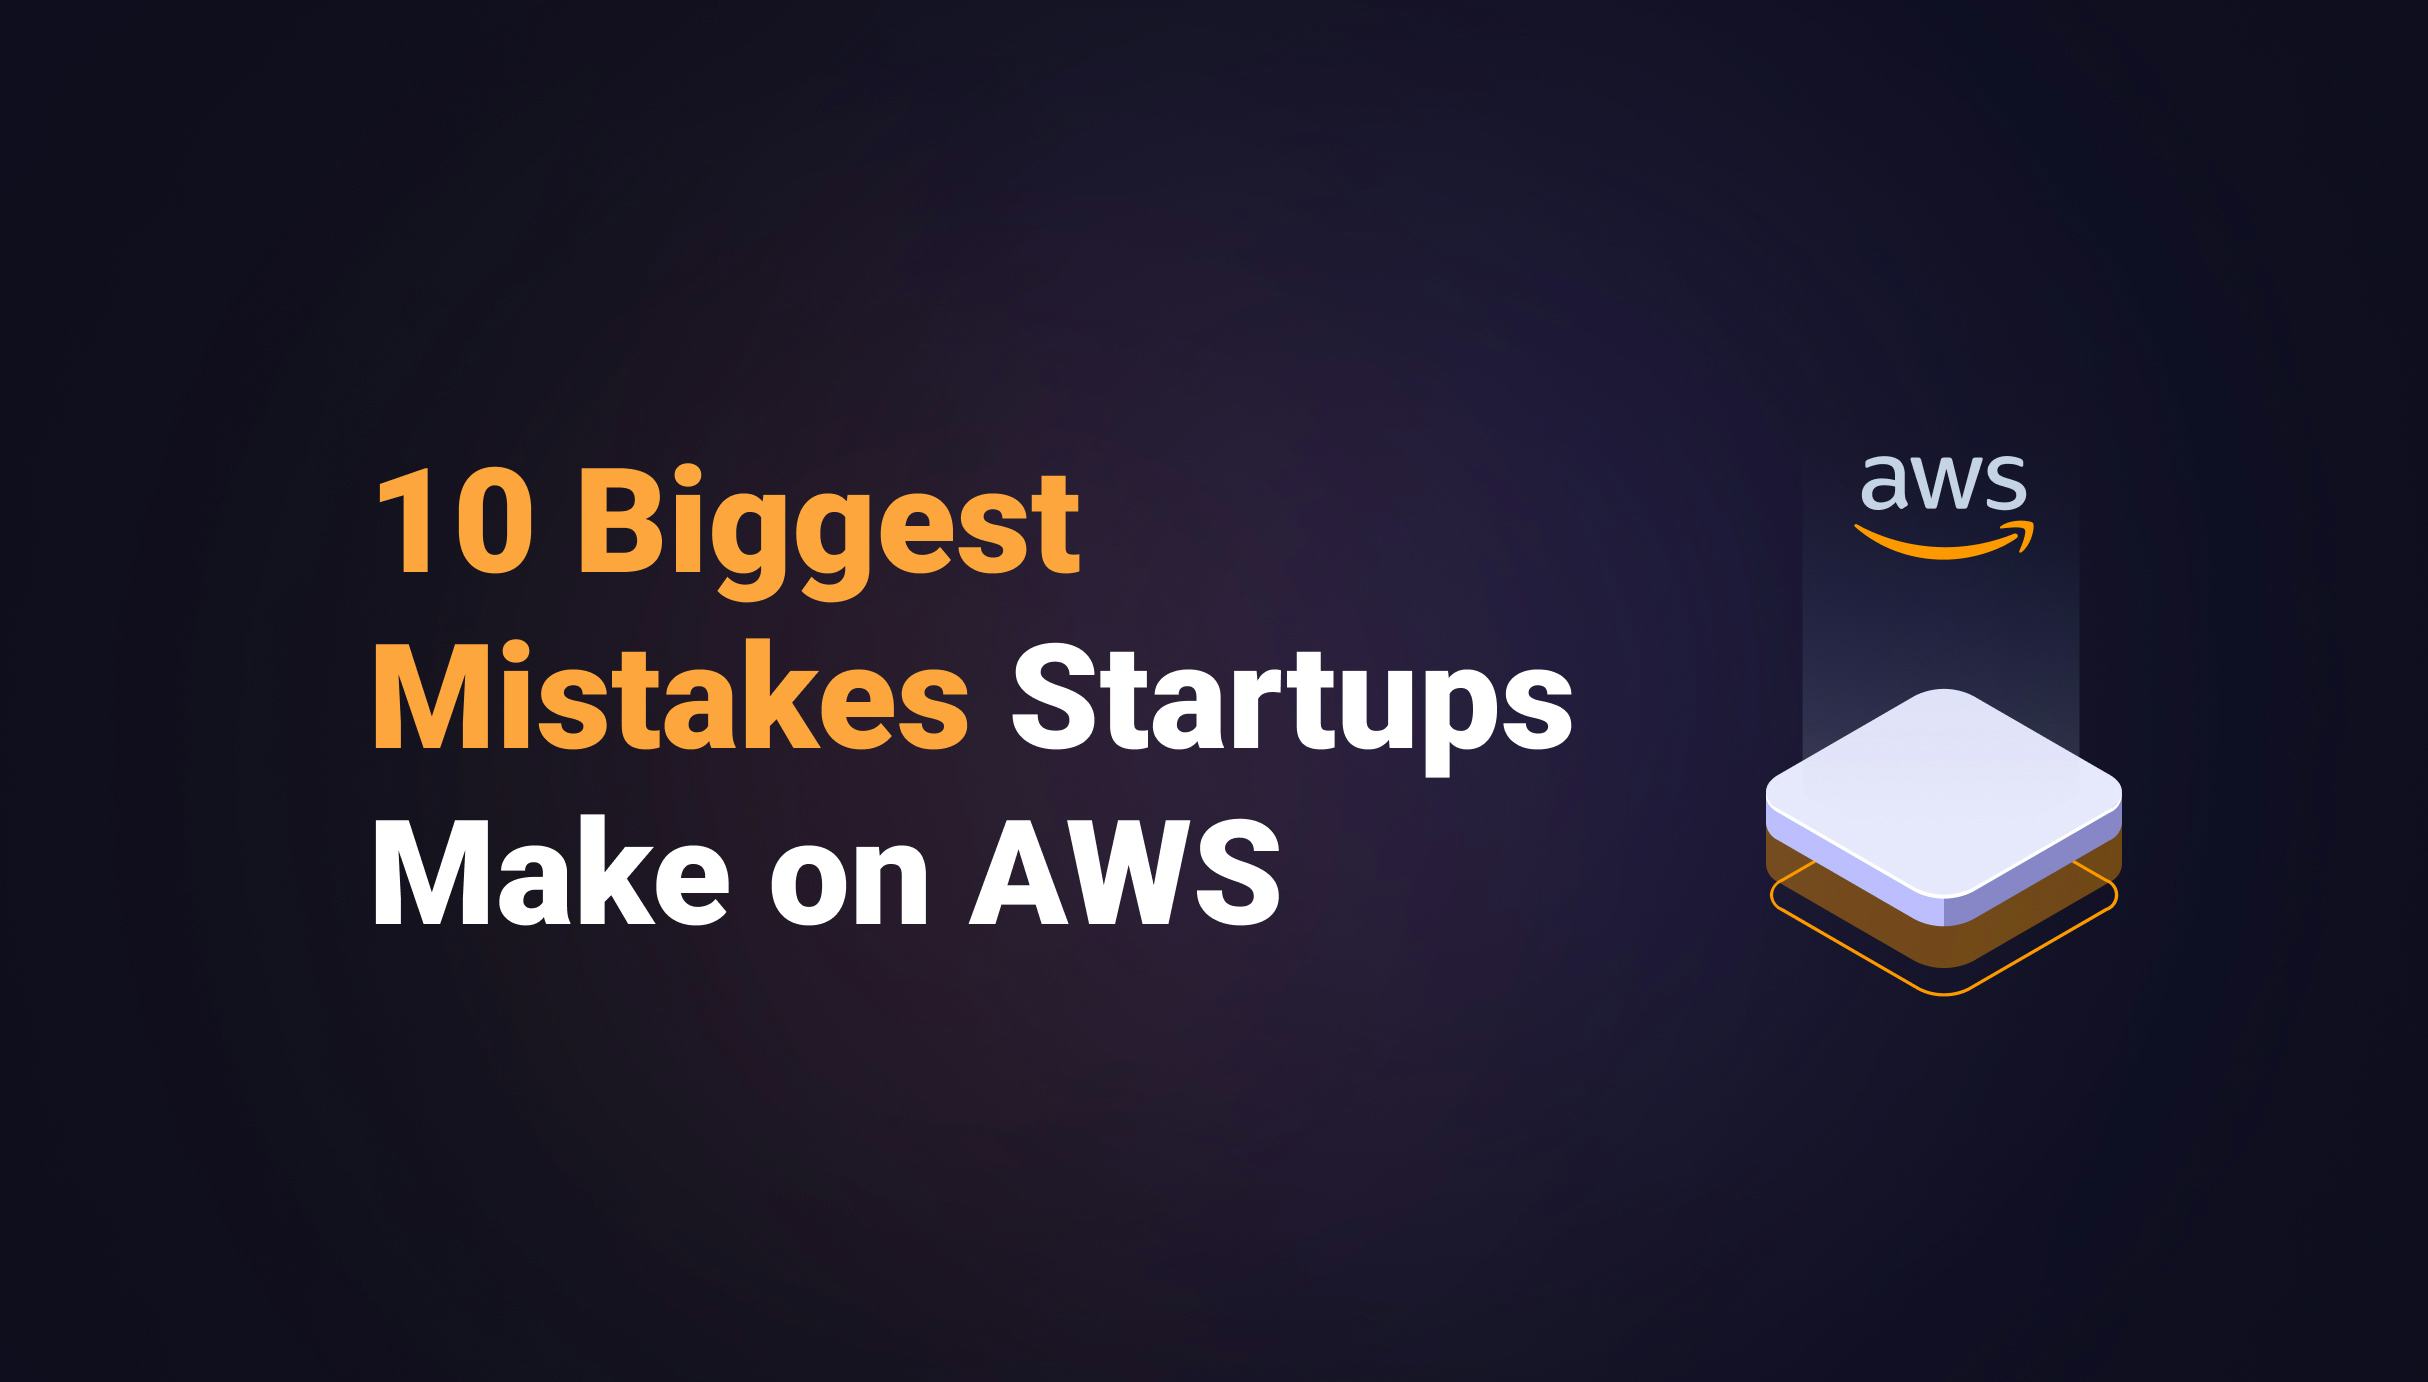 The 10 Biggest Mistakes Startups Make on AWS